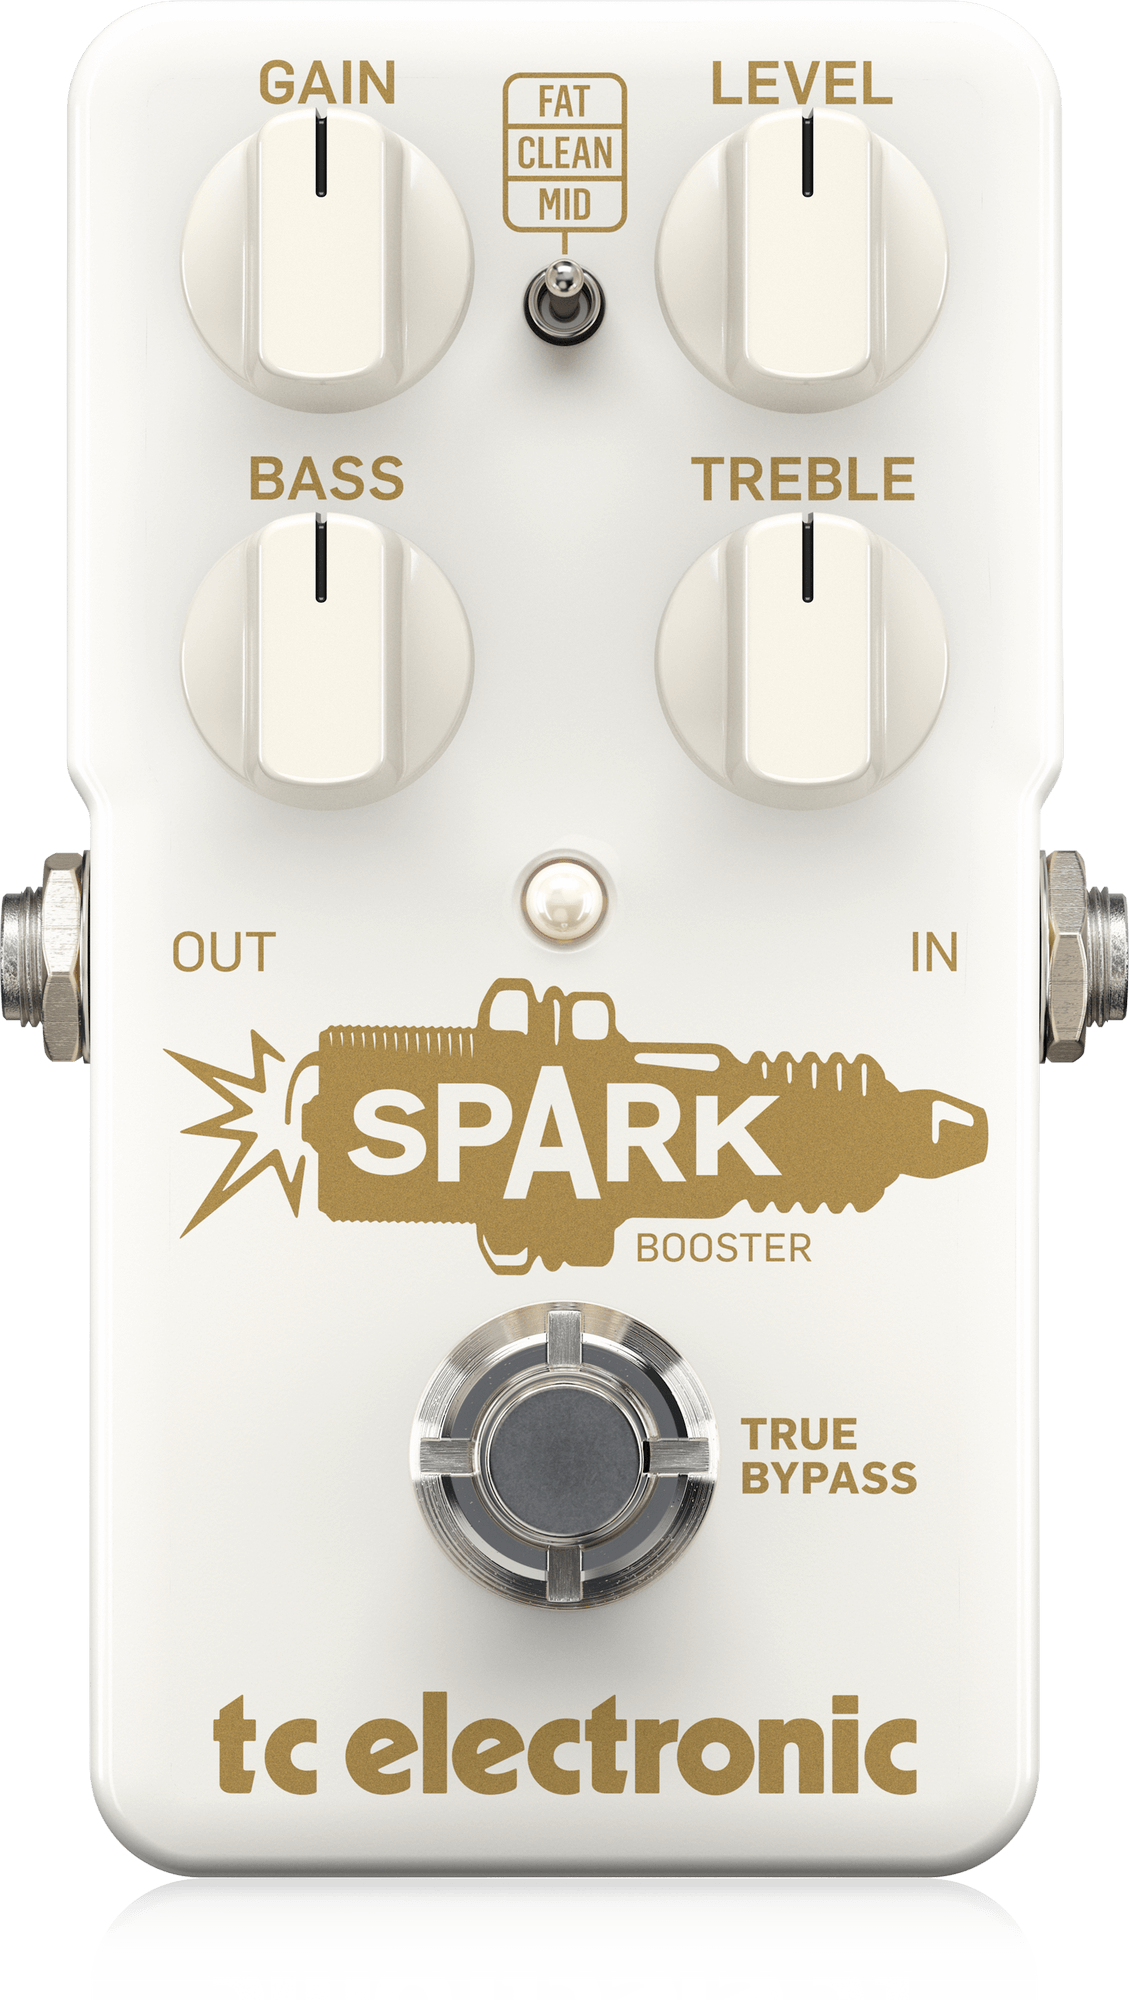 https://mediadl.musictribe.com/media/PLM/data/images/products/P0DDN/2000Wx2000H/Image_TE_P0DDN_SPARK-BOOSTER_Top_XL.png